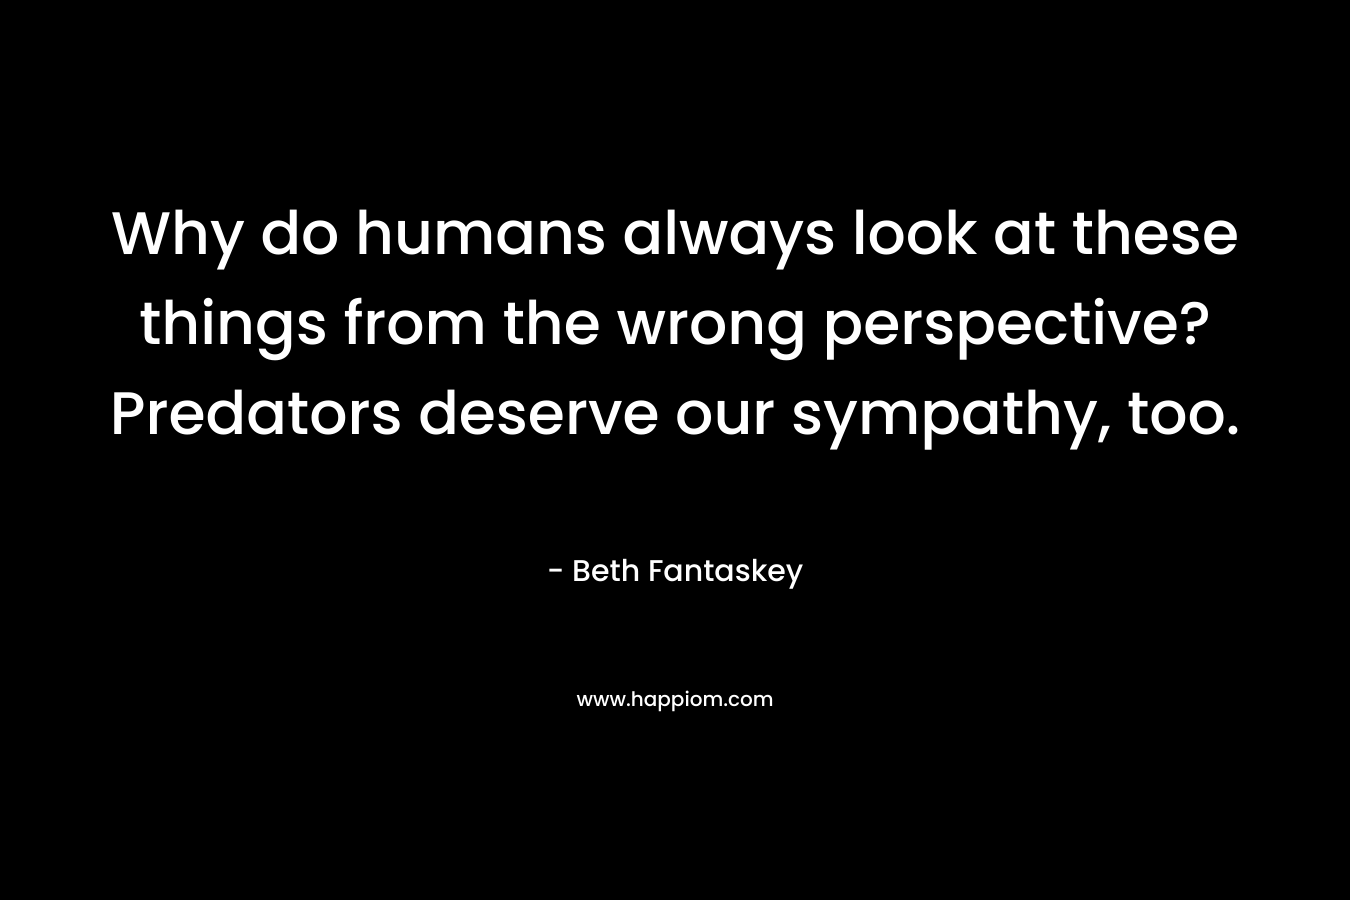 Why do humans always look at these things from the wrong perspective? Predators deserve our sympathy, too. – Beth Fantaskey